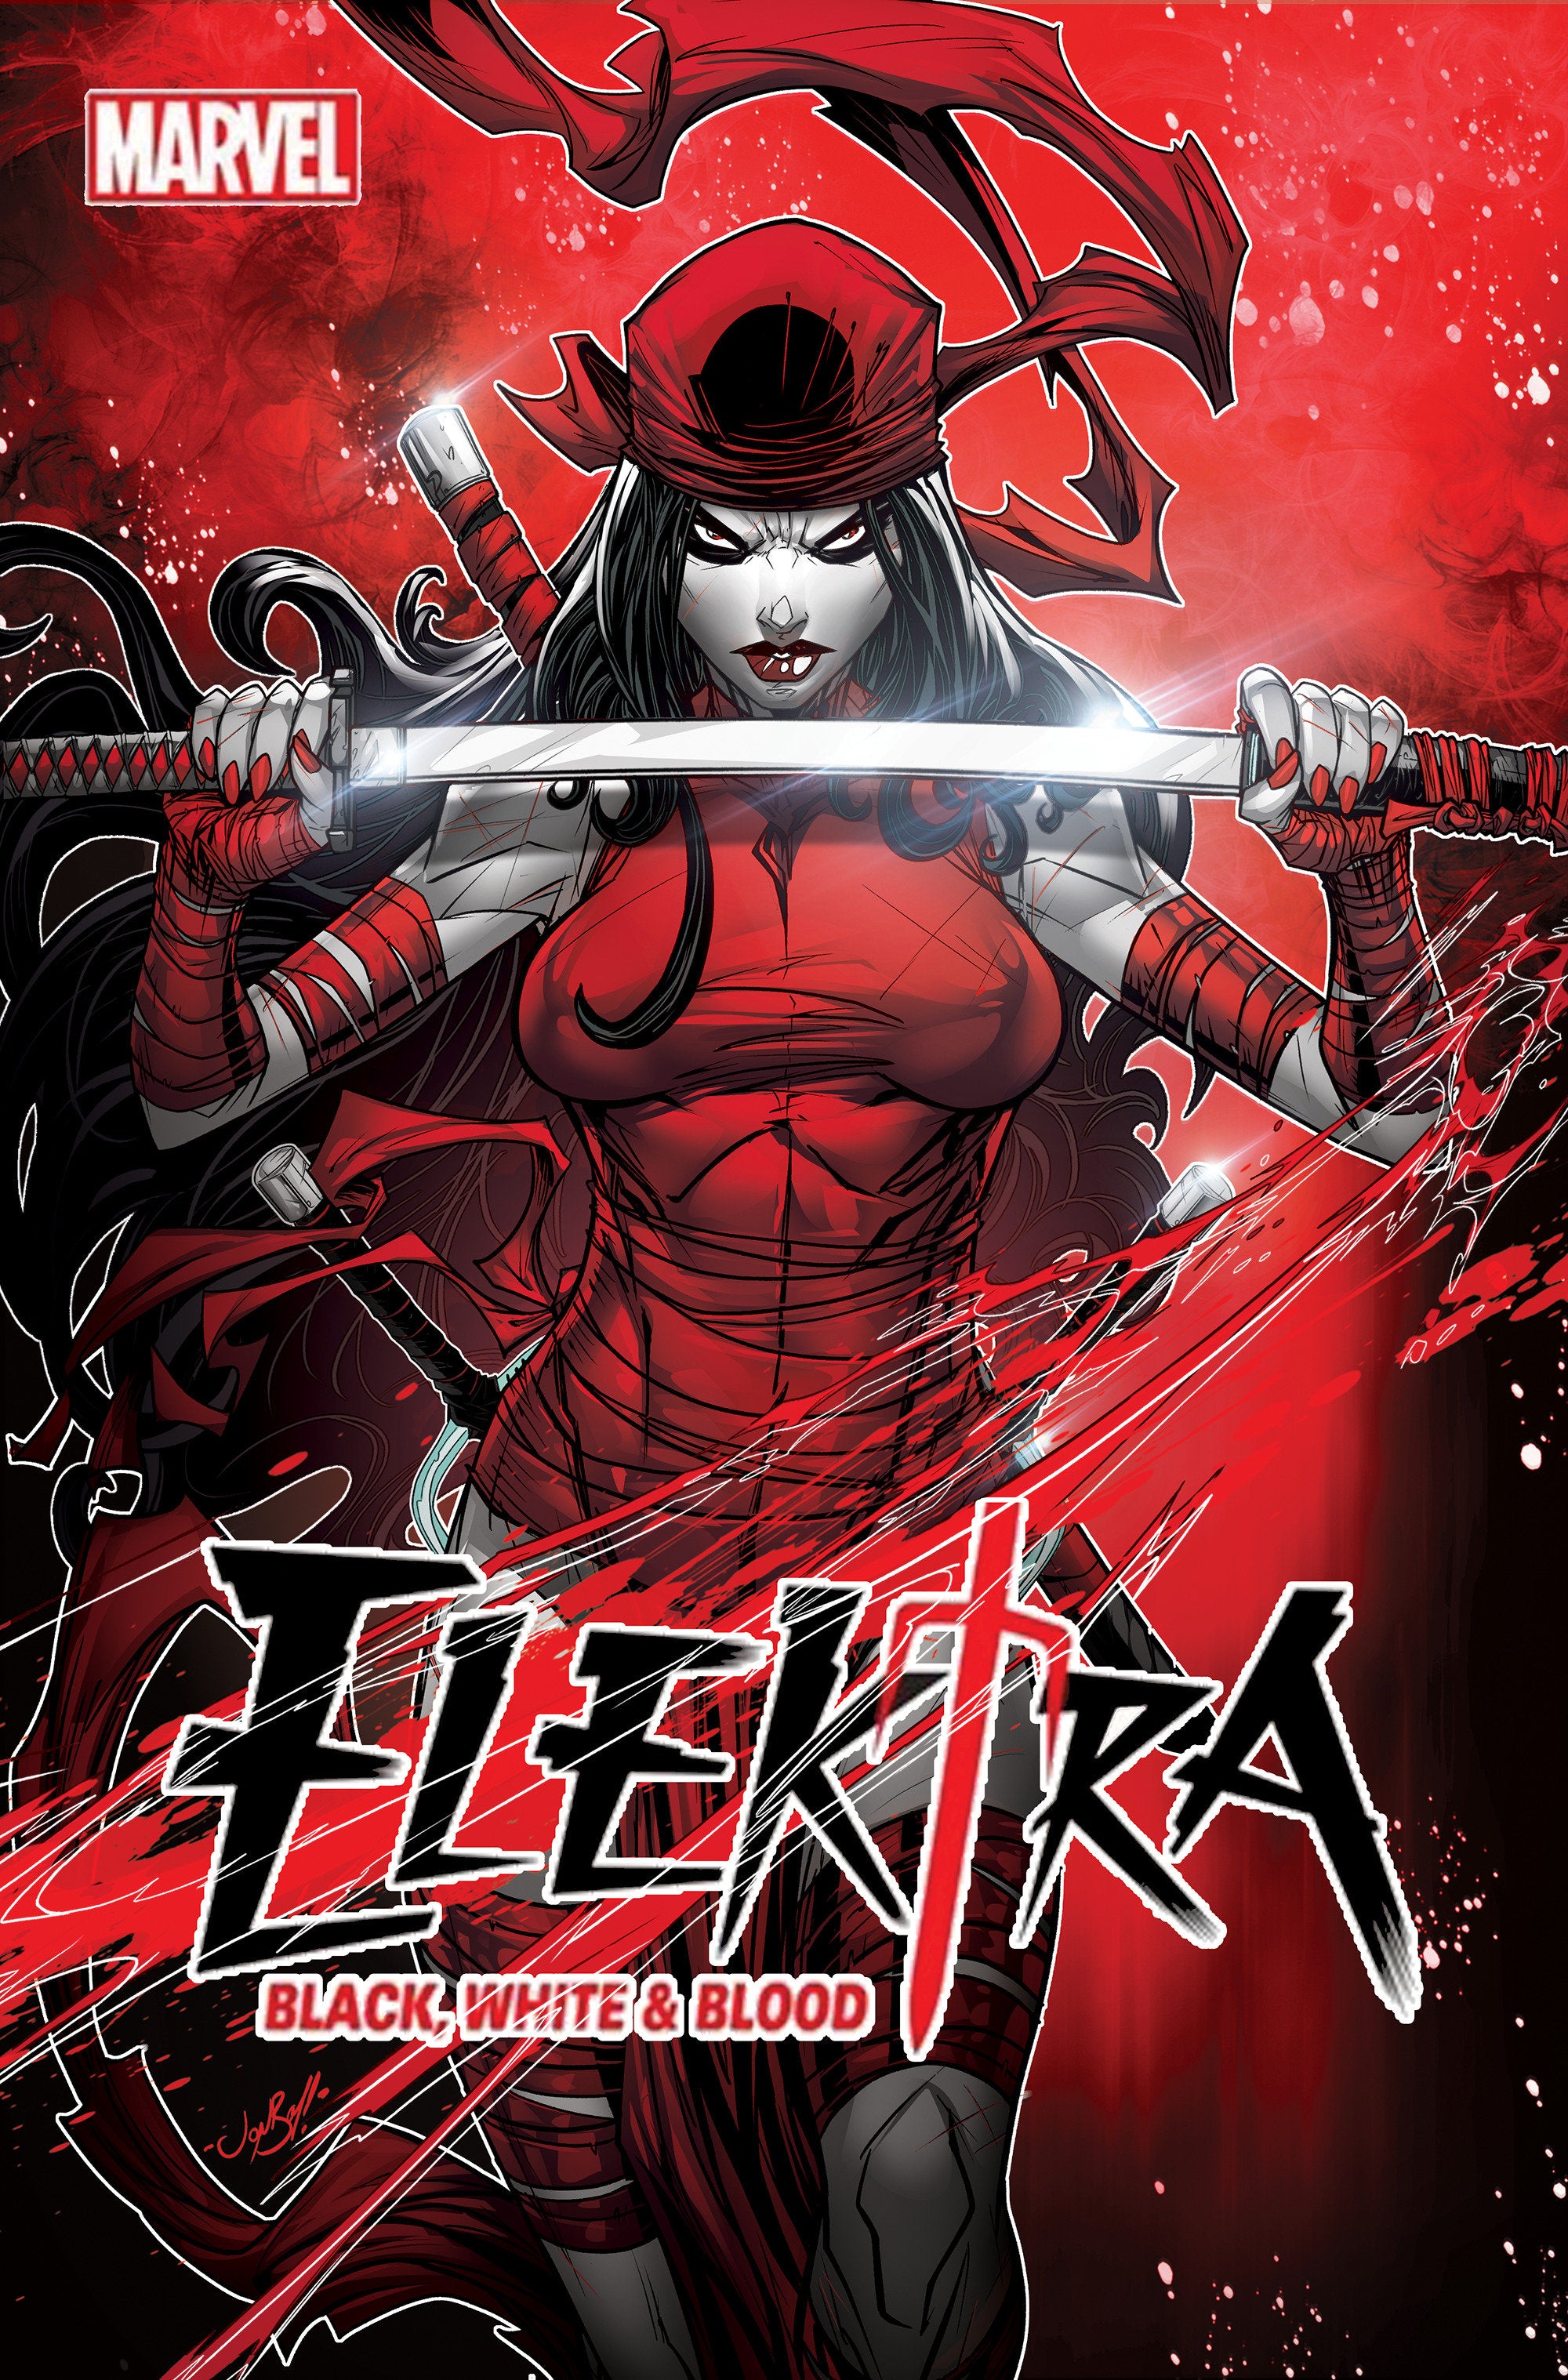 Image of Elektra: Black, White & Blood 2 Meyers Variant comic sold by Stronghold Collectibles.